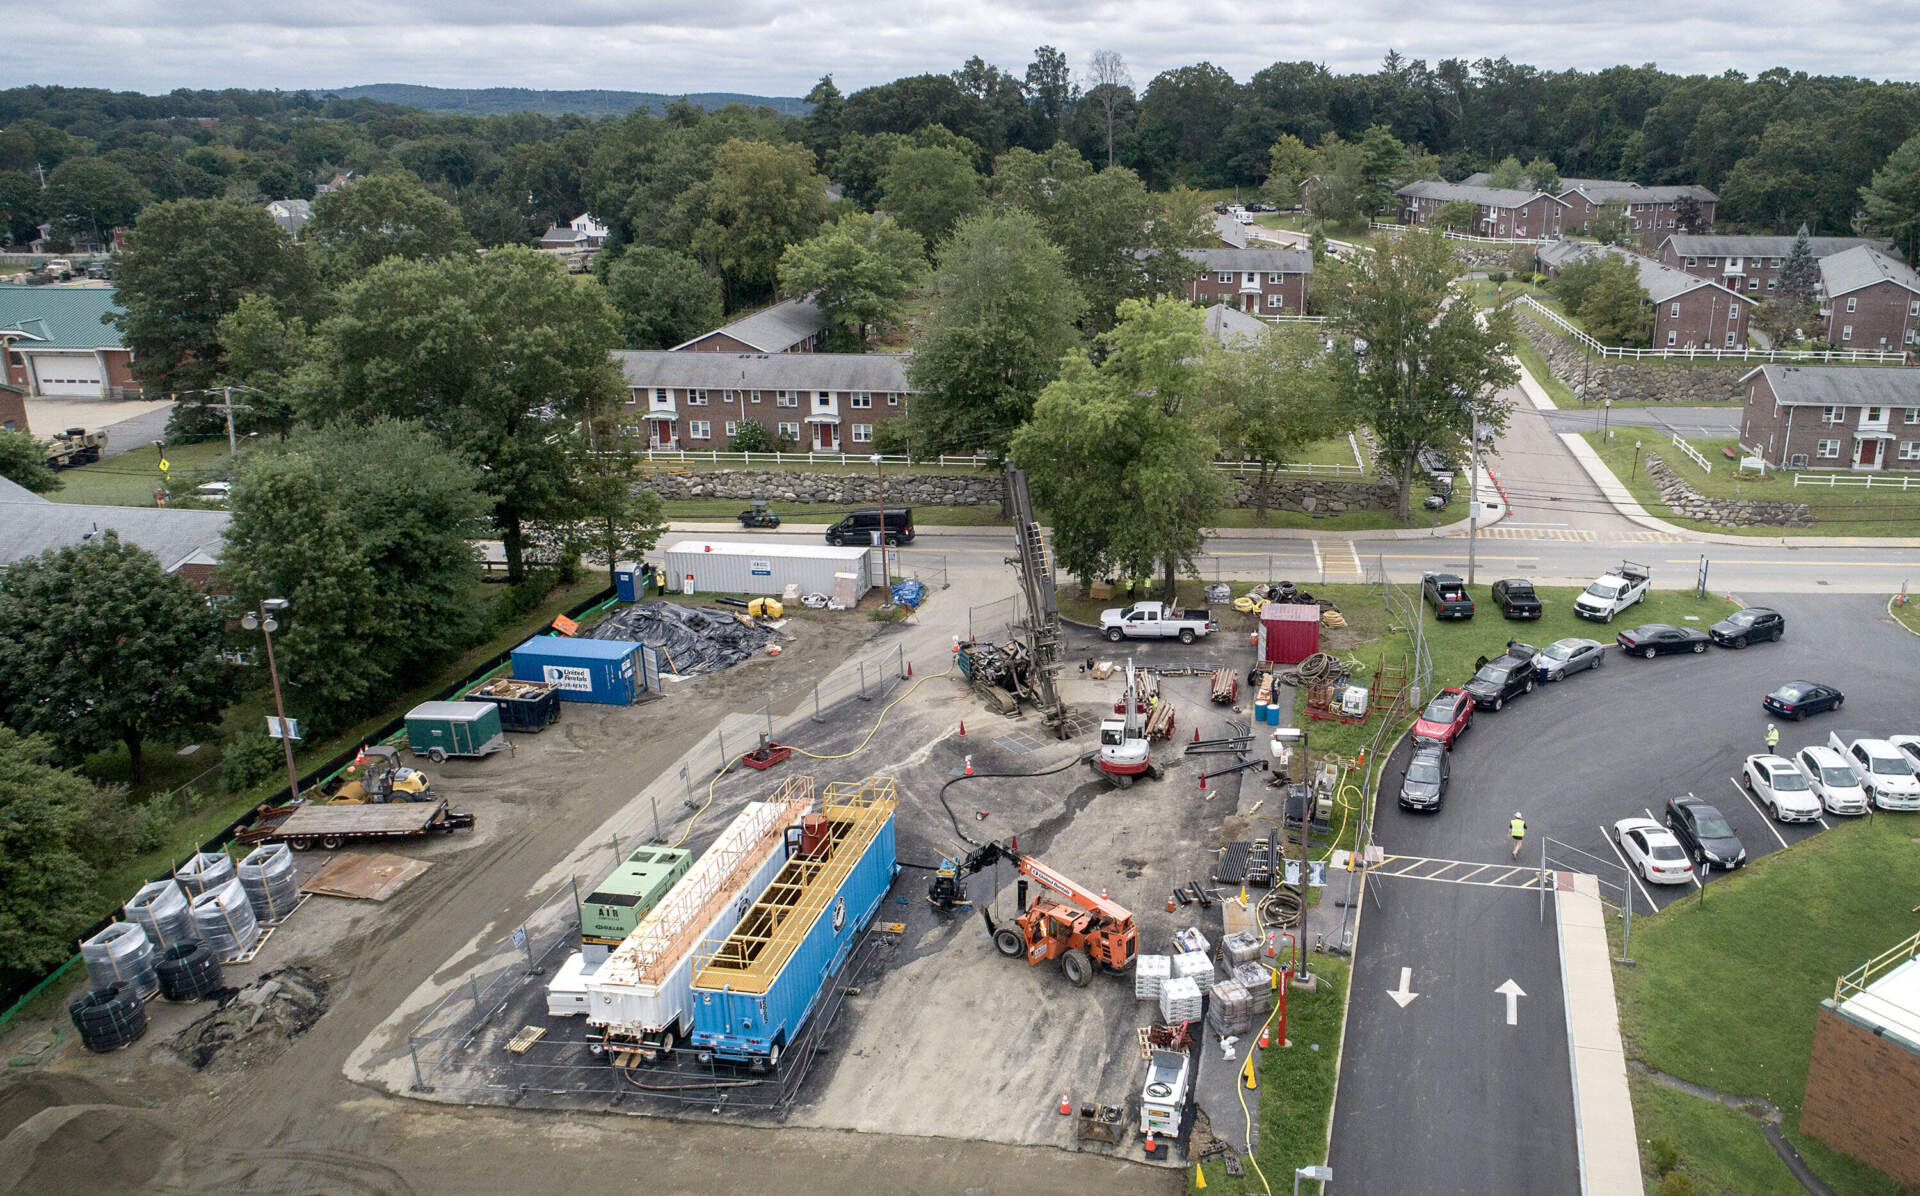 A drill bores geothermal wells near the Rose Kennedy Lane housing complex in Framingham. (Robin Lubbock/WBUR)